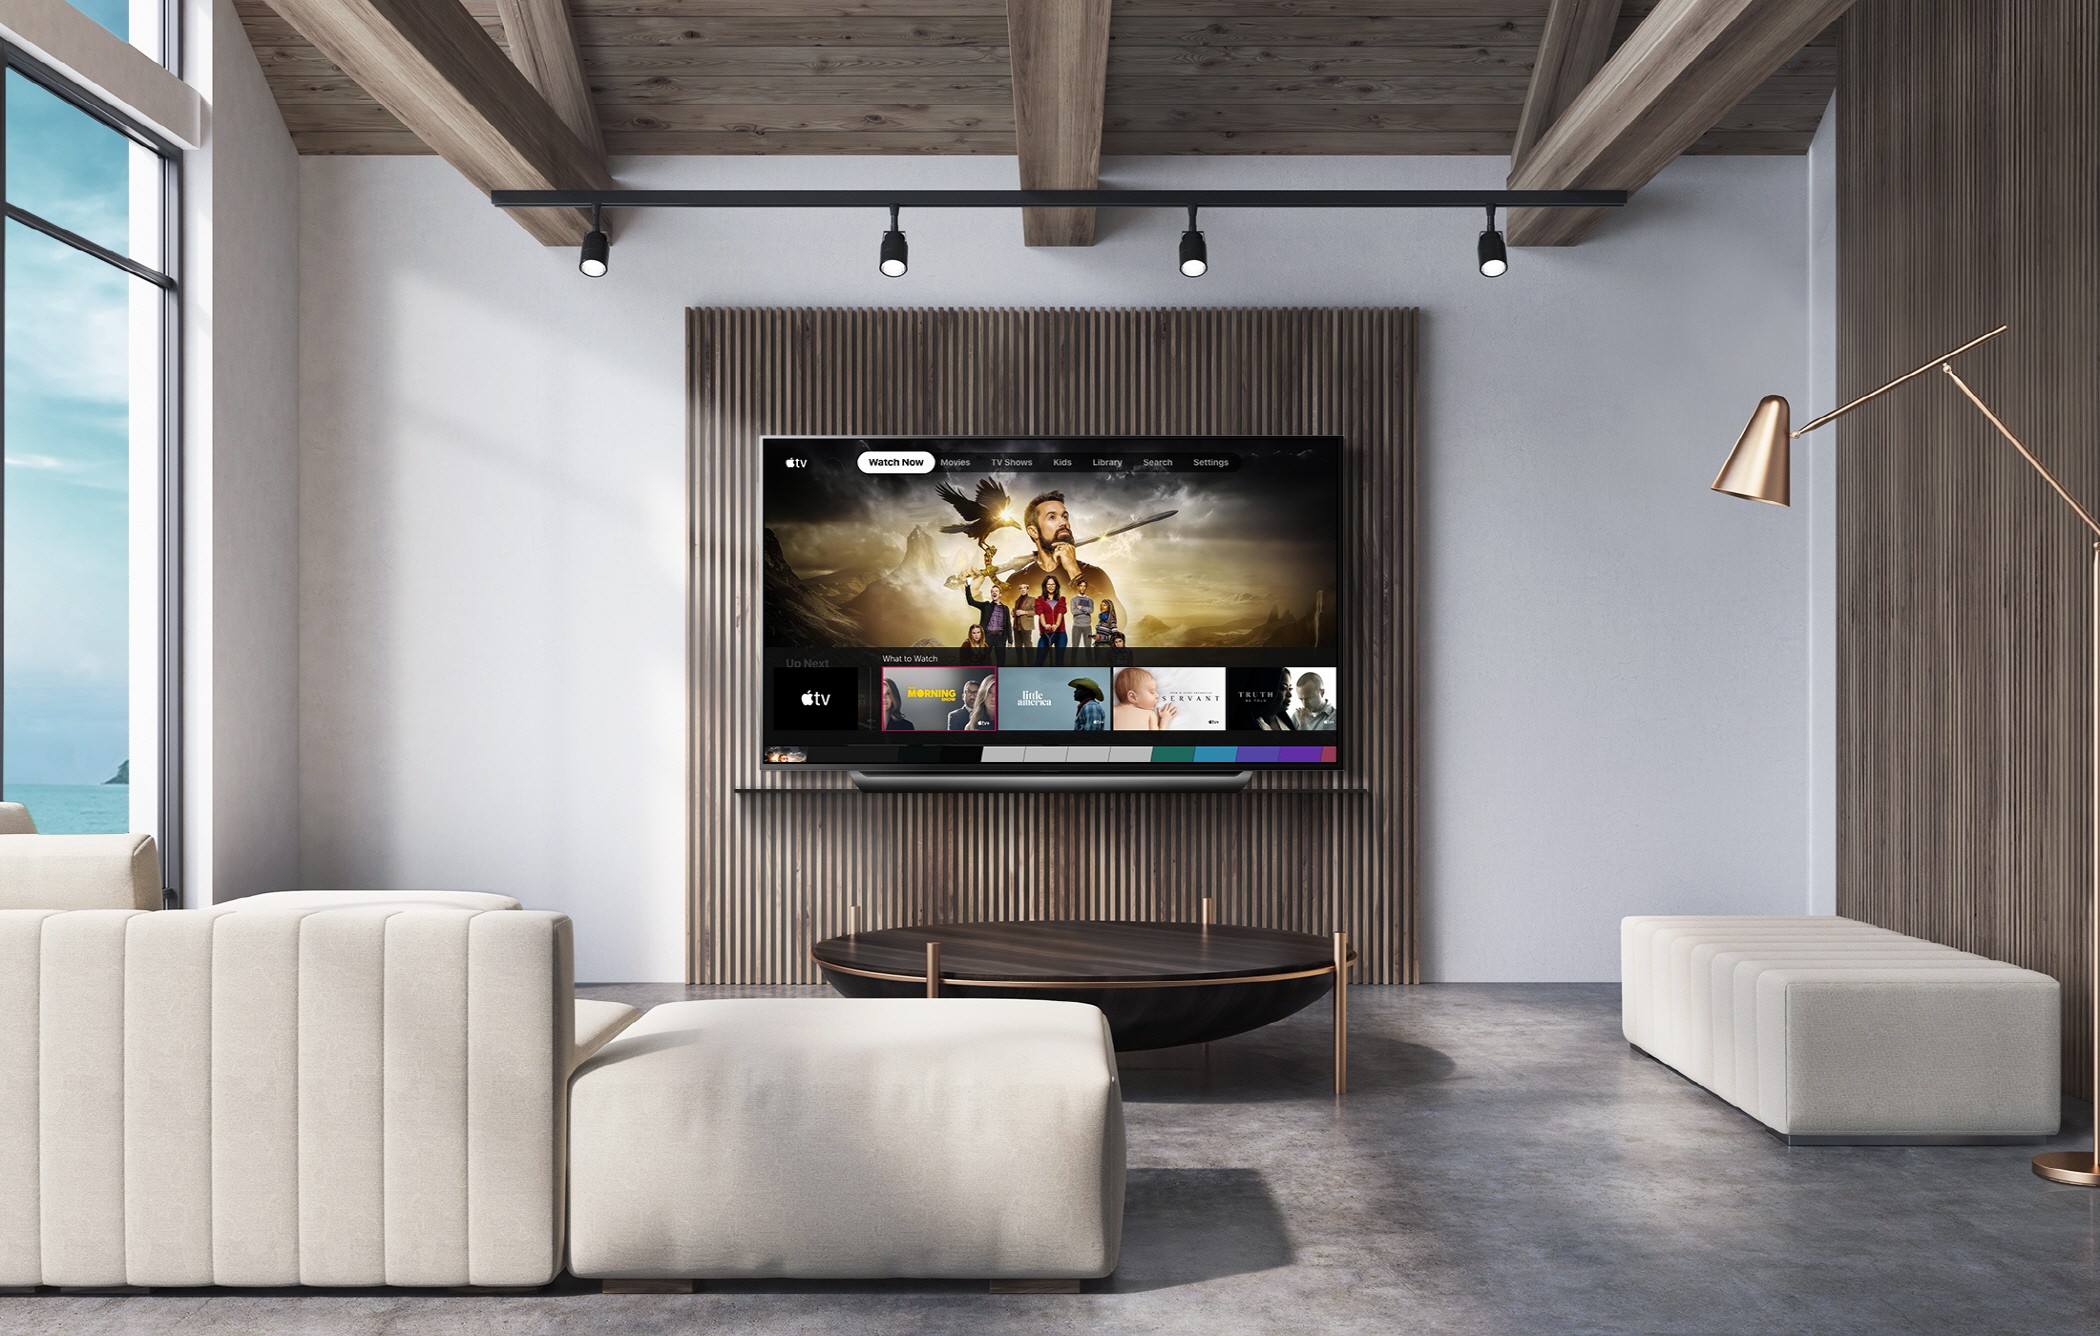 A view of an LG TV hanging on the wall of a wide modern living room as it displays the Apple TV app.